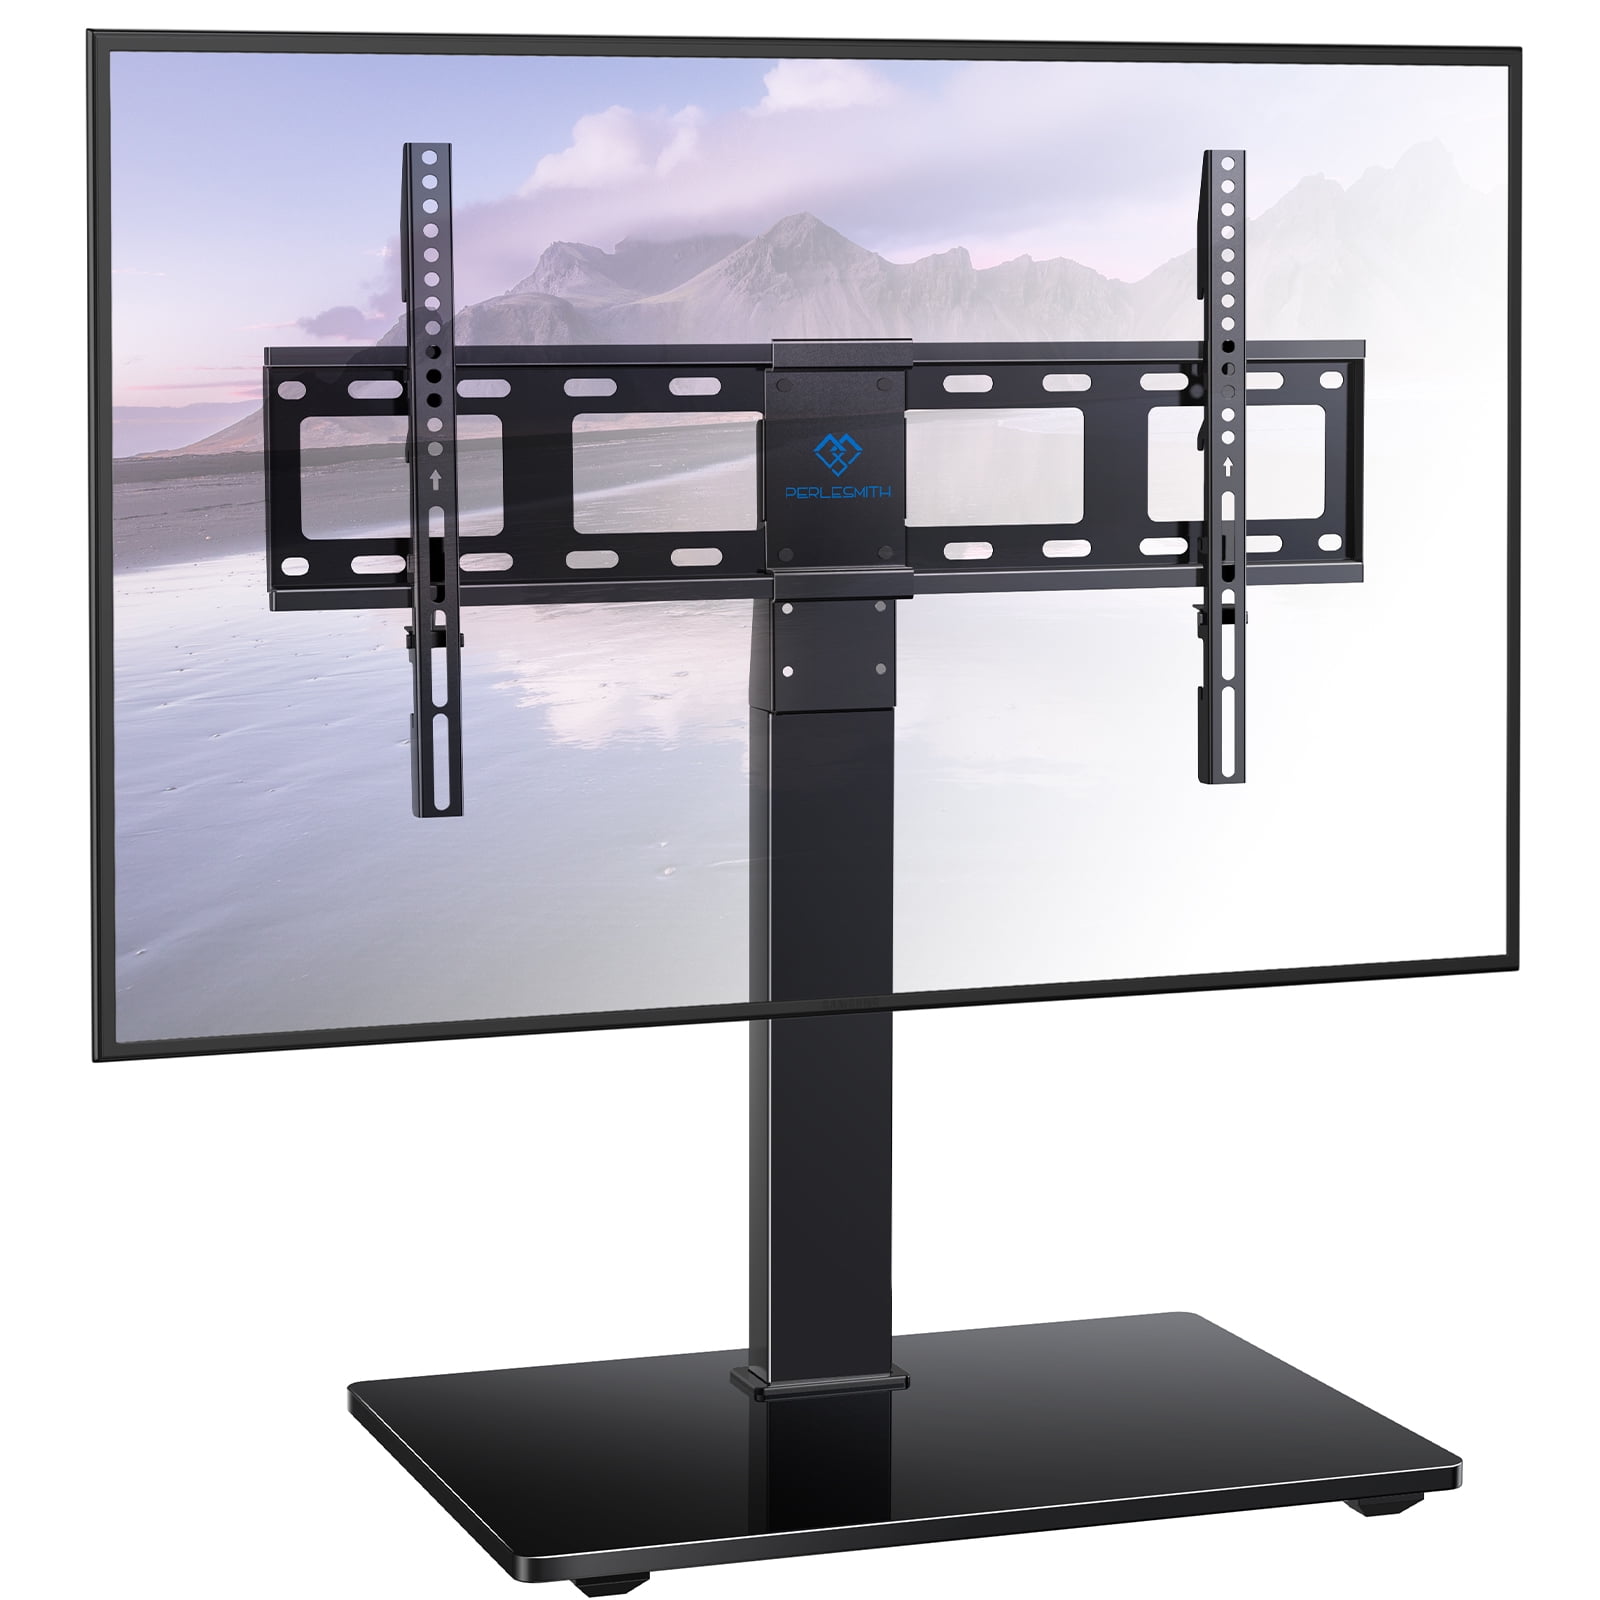 PERLESMITH Universal TV Stand for Most 37-70" LED with Height Adjustable Max 600x400mm, Holds up to lbs - Walmart.com